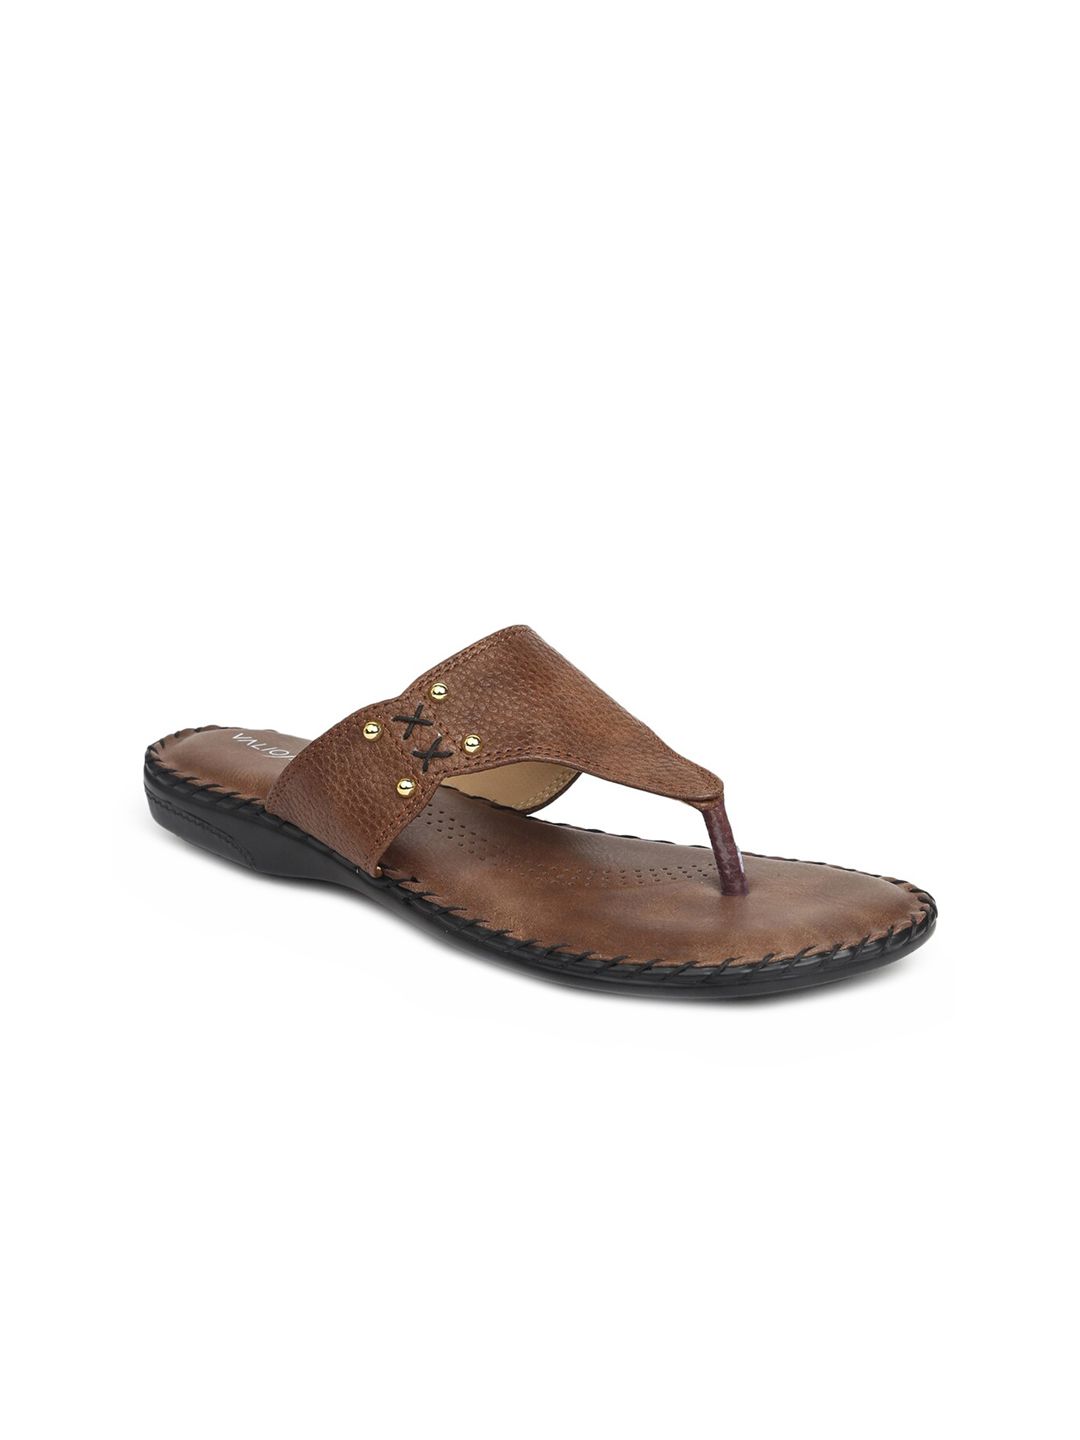 VALIOSAA Women Brown T-Strap Flats with Laser Cuts Price in India